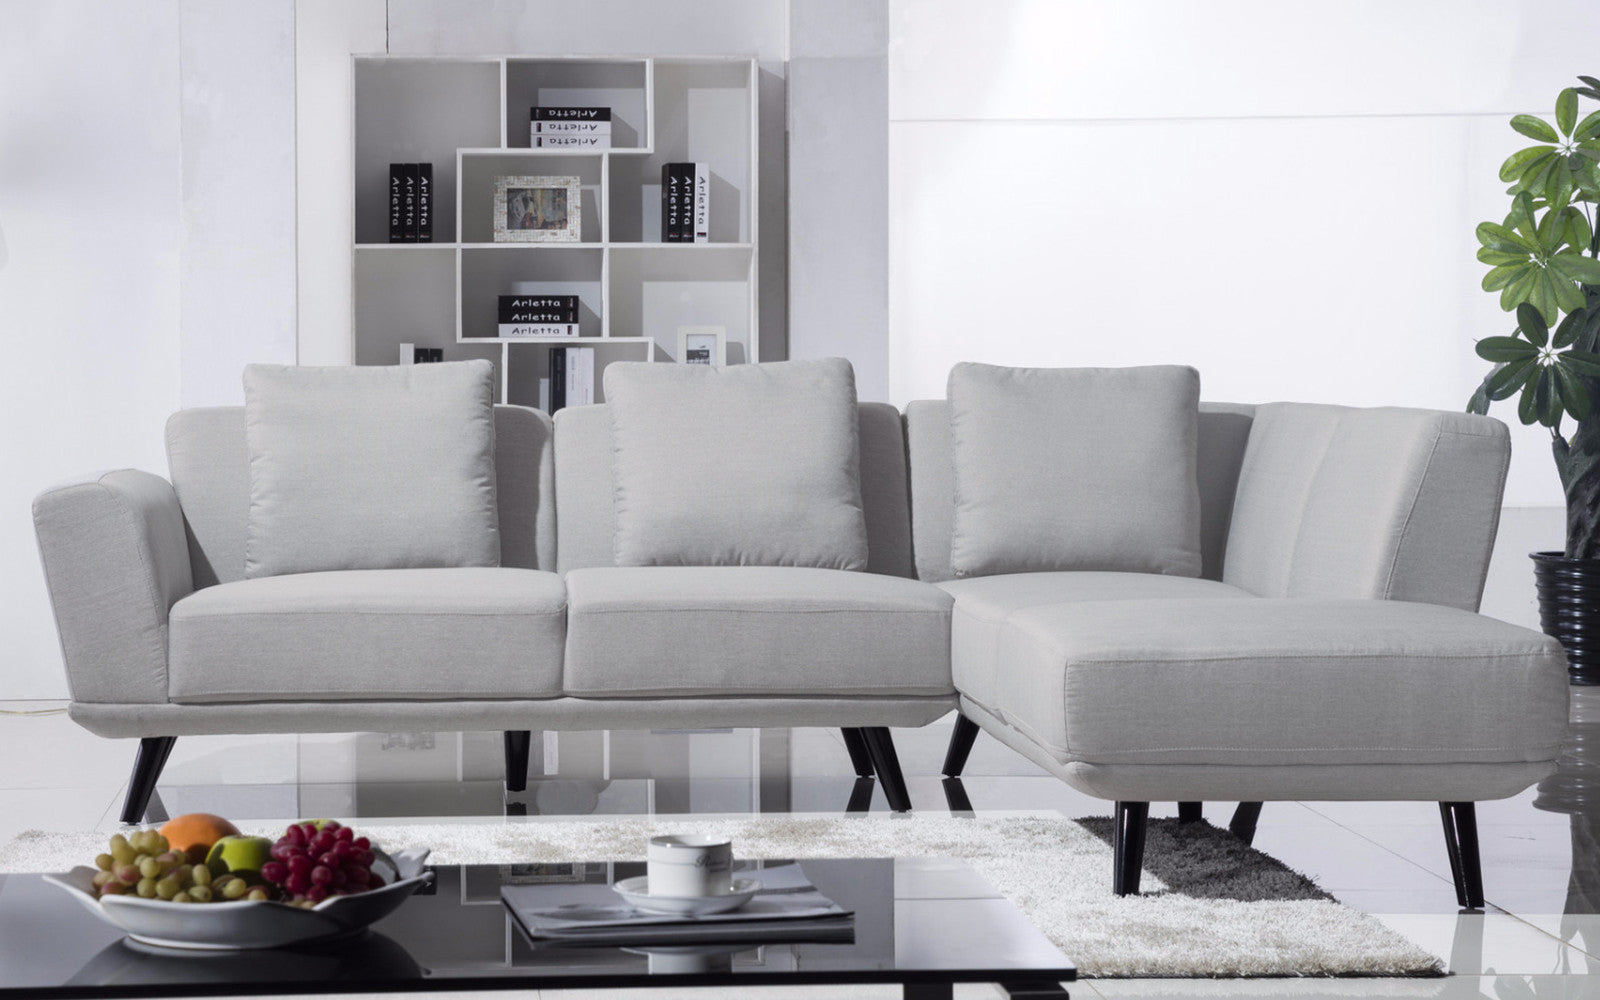 EXP145-RIGHTCHAISE-LGR Galleria Mid Century Modern Sectional - Light Grey sku EXP145-RIGHTCHAISE-LGR